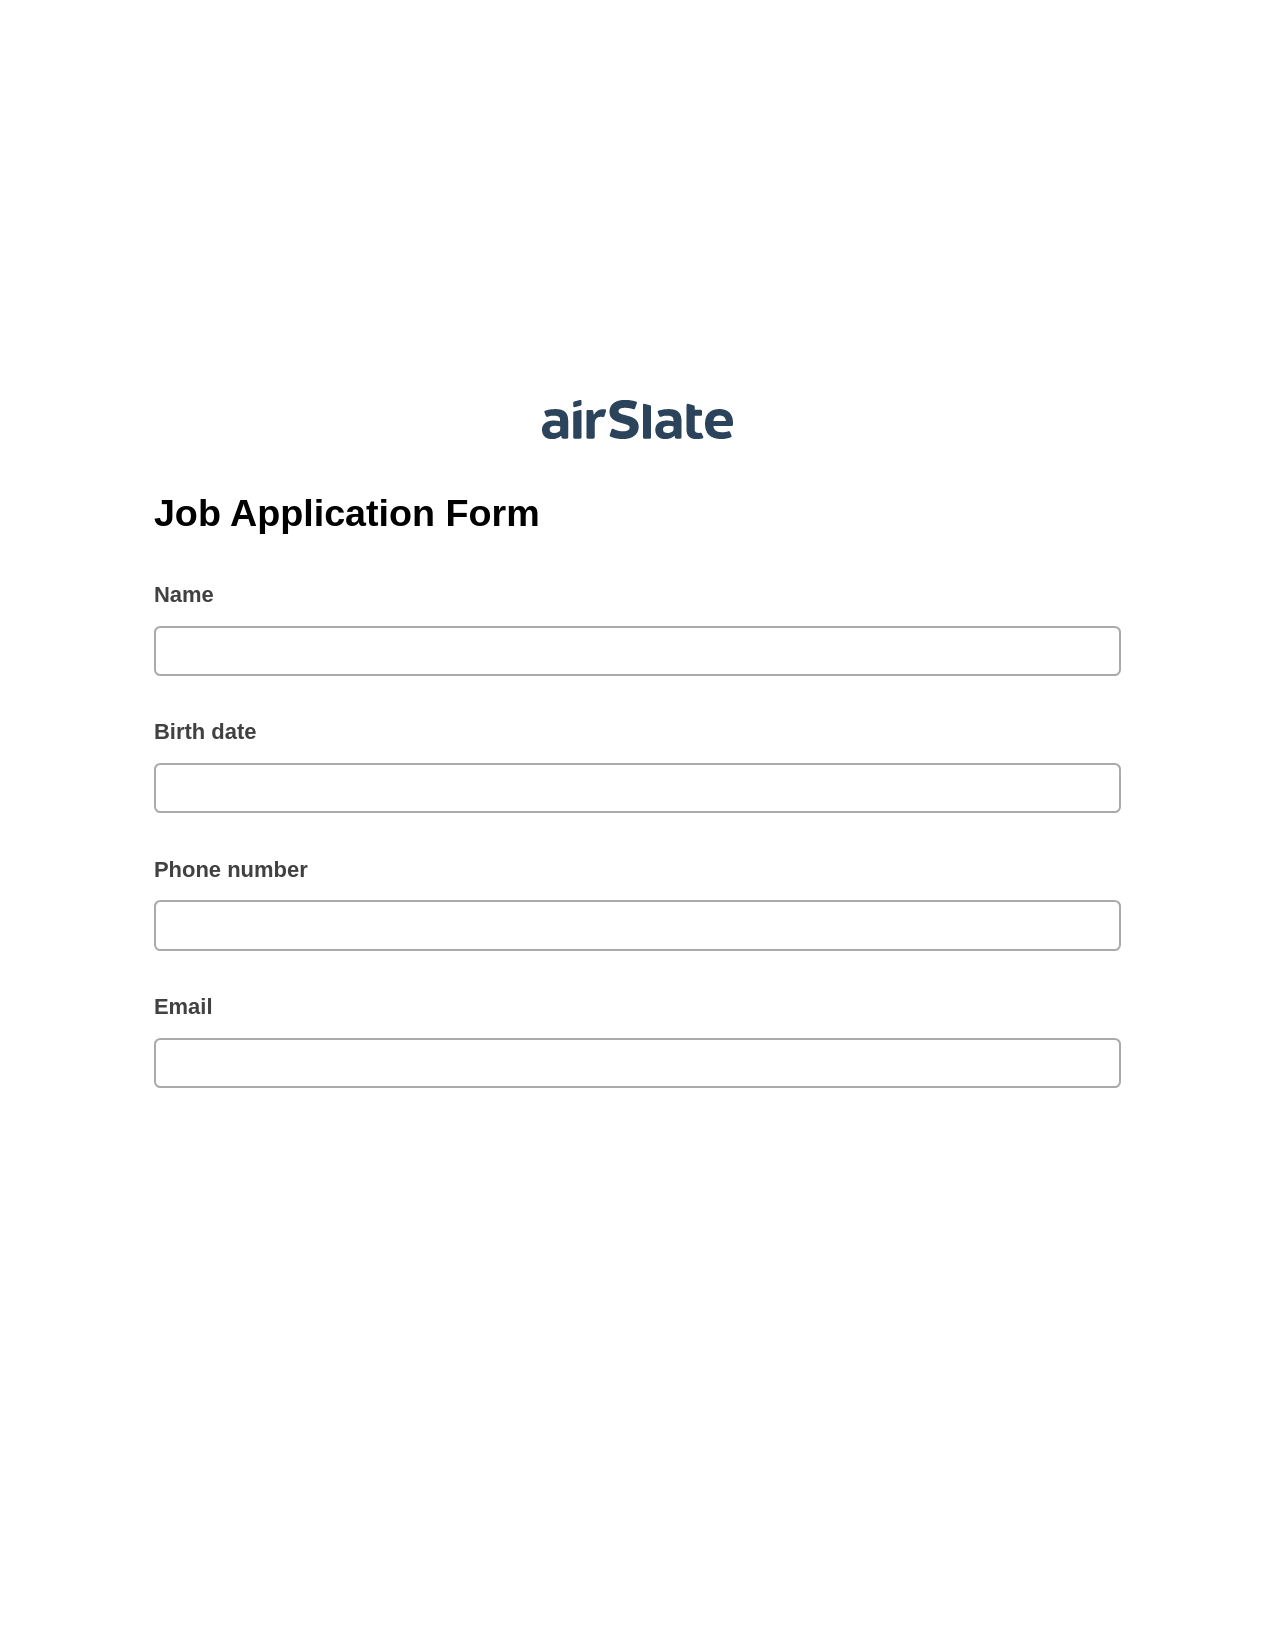 Multirole Job Application Form Pre-fill Slate from MS Dynamics 365 Records Bot, Create NetSuite Records Bot, Export to MySQL Bot